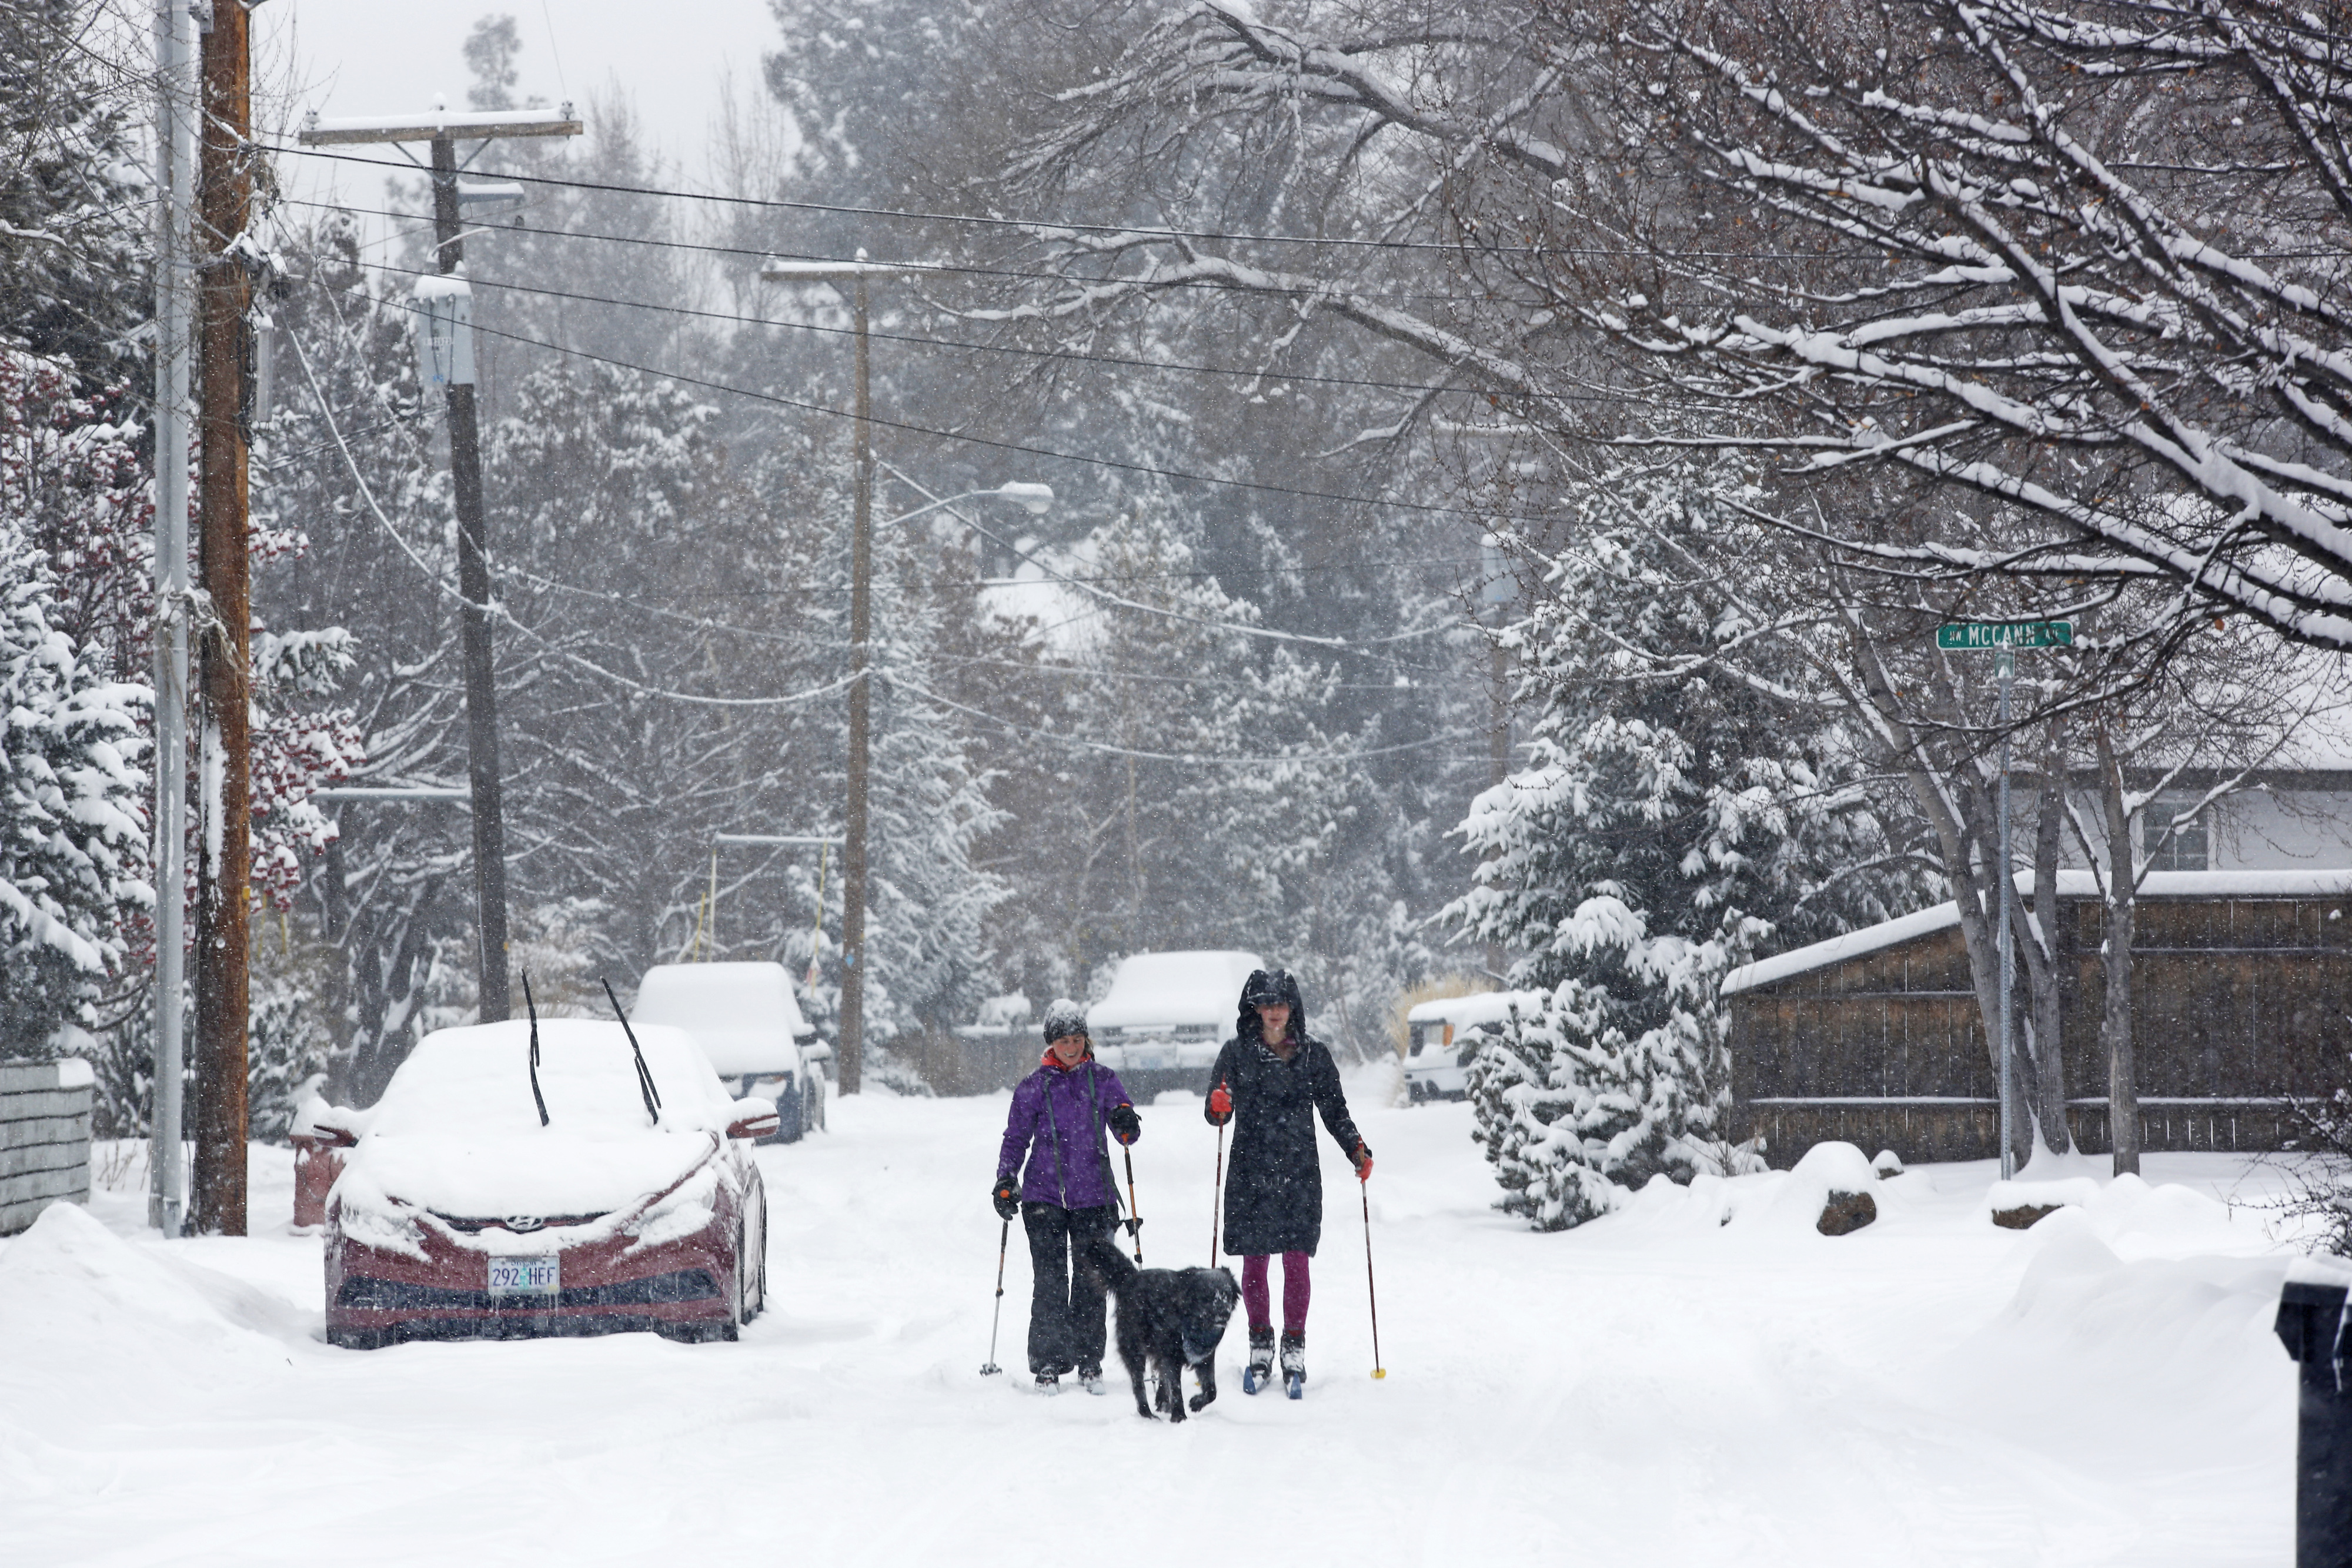 Anna Kaufman, left, and Hannah Rindlaub, right, ski down Riverfront Street in Bend, Ore., with their dog, Tula, during a winter storm on Dec. 8, 2016. (Jarod Opperman—The Bulletin/AP)